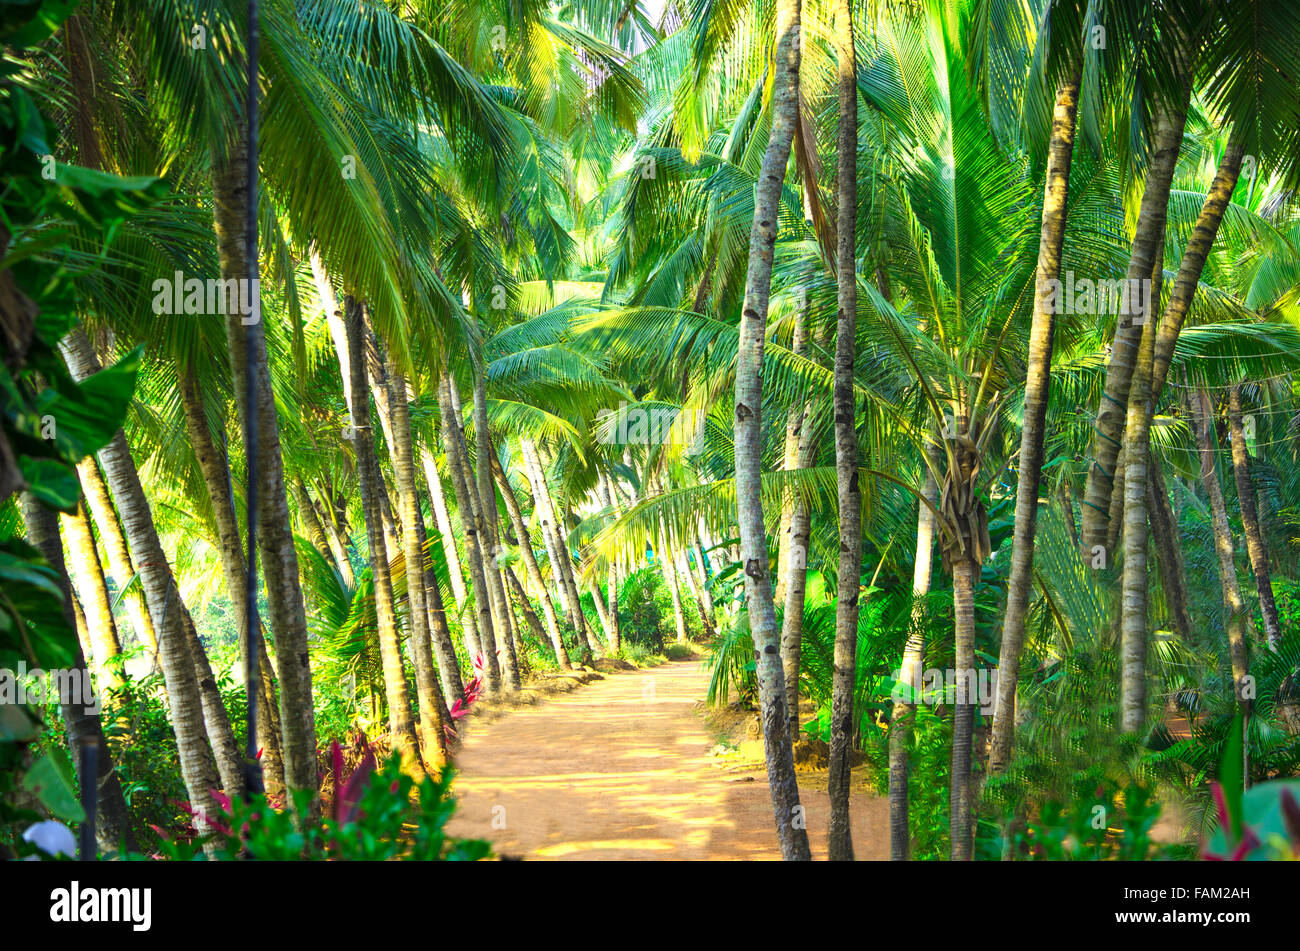 palm tree trees along the road,palm trees,trees,plants of india,asia,it is expensive,in a row,the orange earth,palm trees Stock Photo